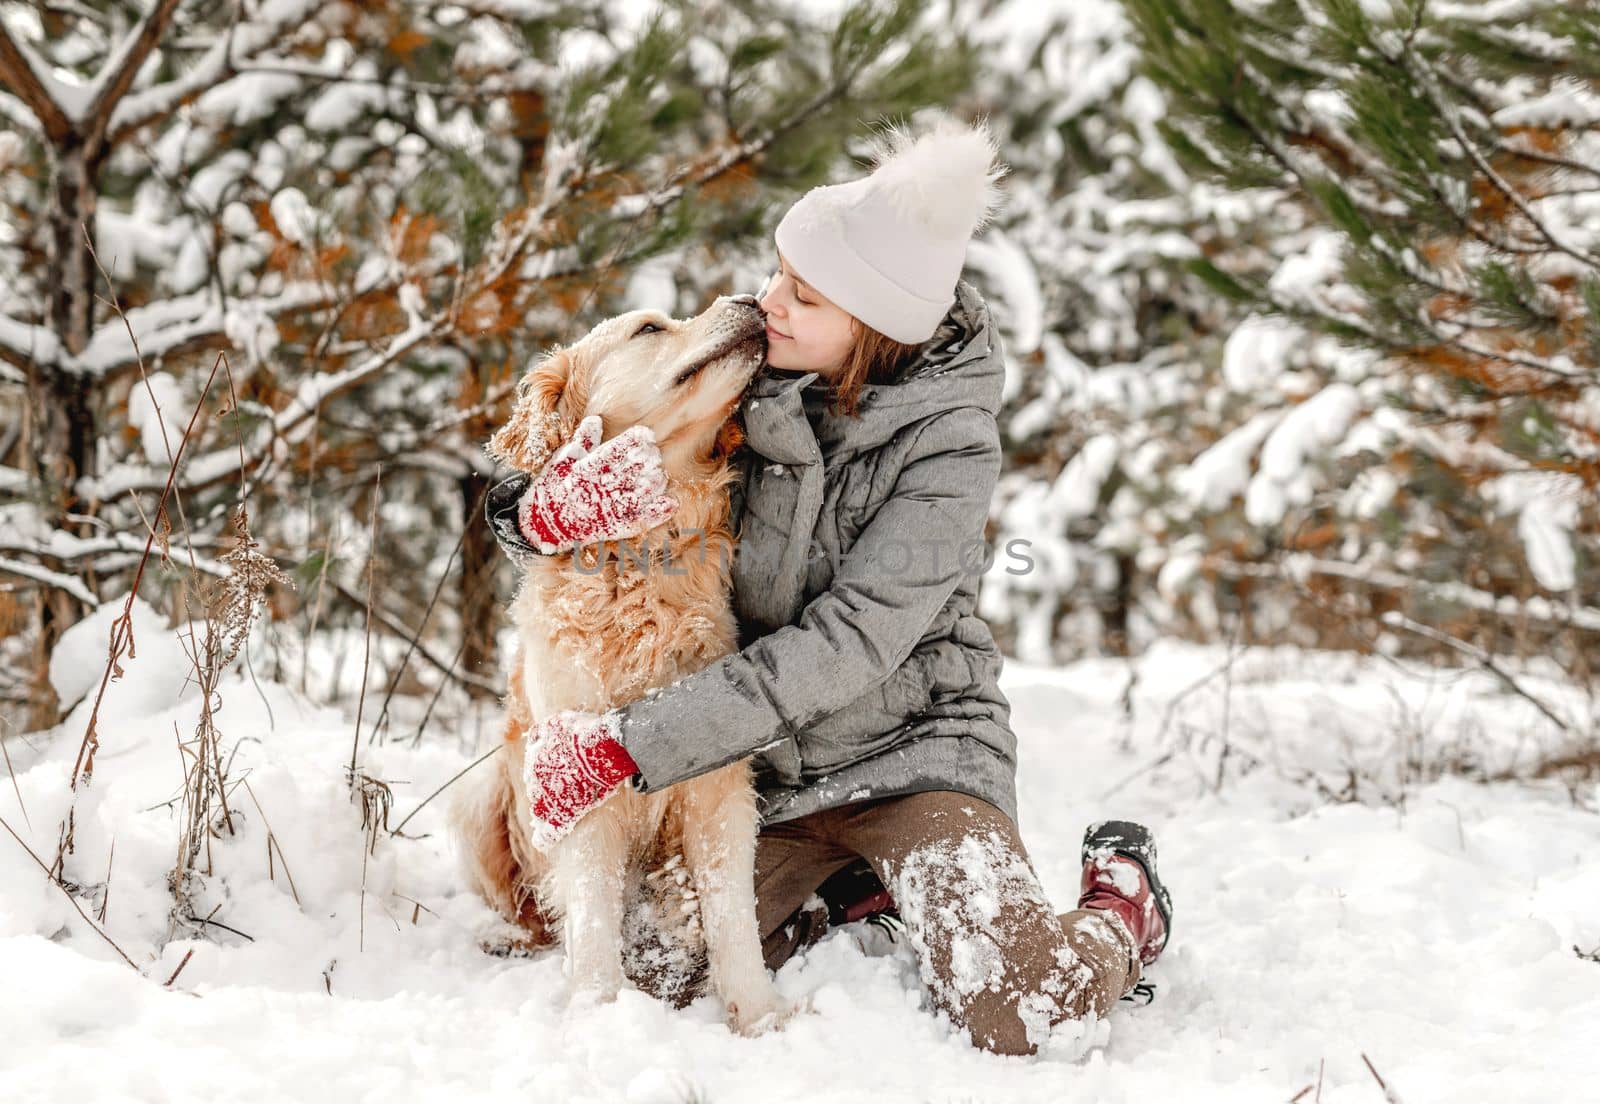 Girl petting and hugging golden retriever dog sitting in snow in winter time. Young woman with doggy pet outdoors in cold weather with snowflakes